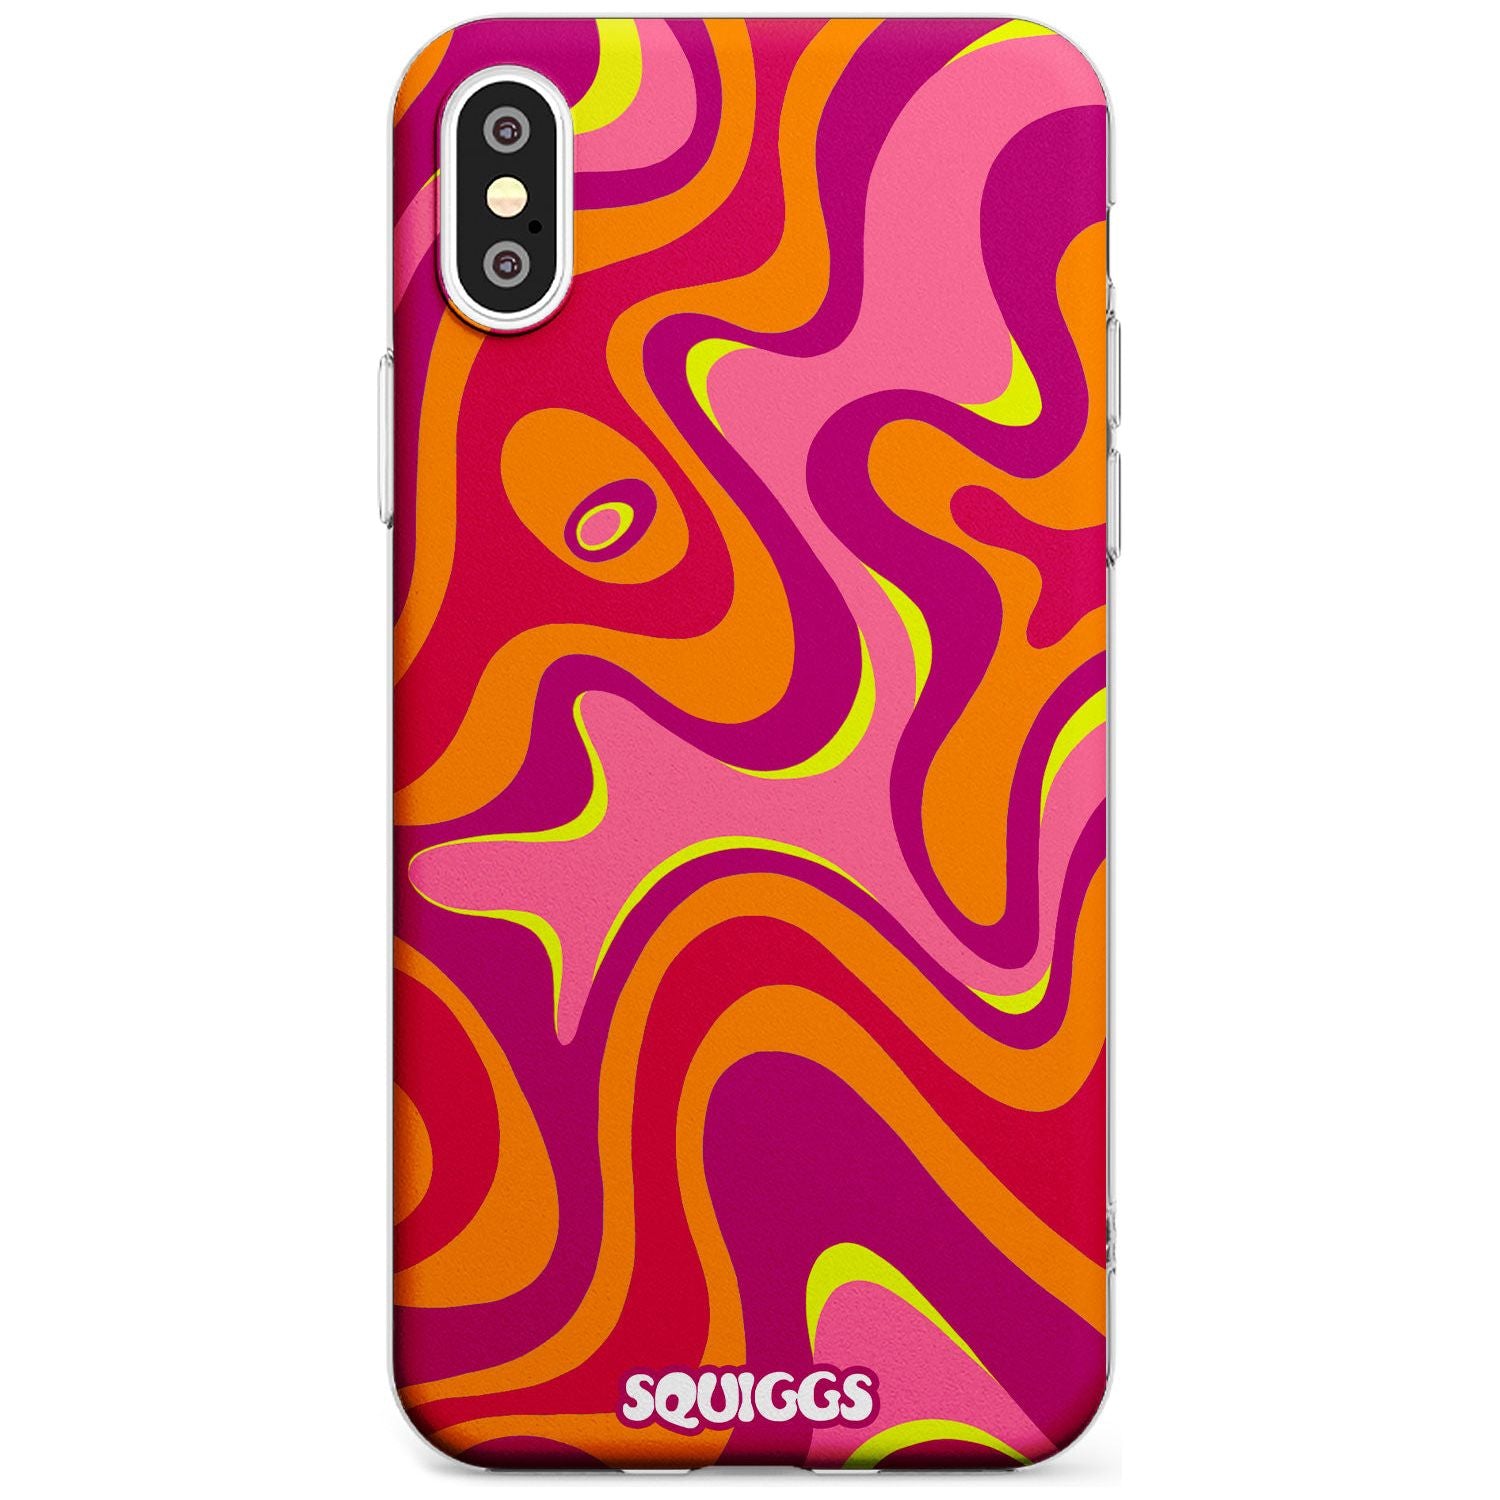 Hot Lava Black Impact Phone Case for iPhone X XS Max XR